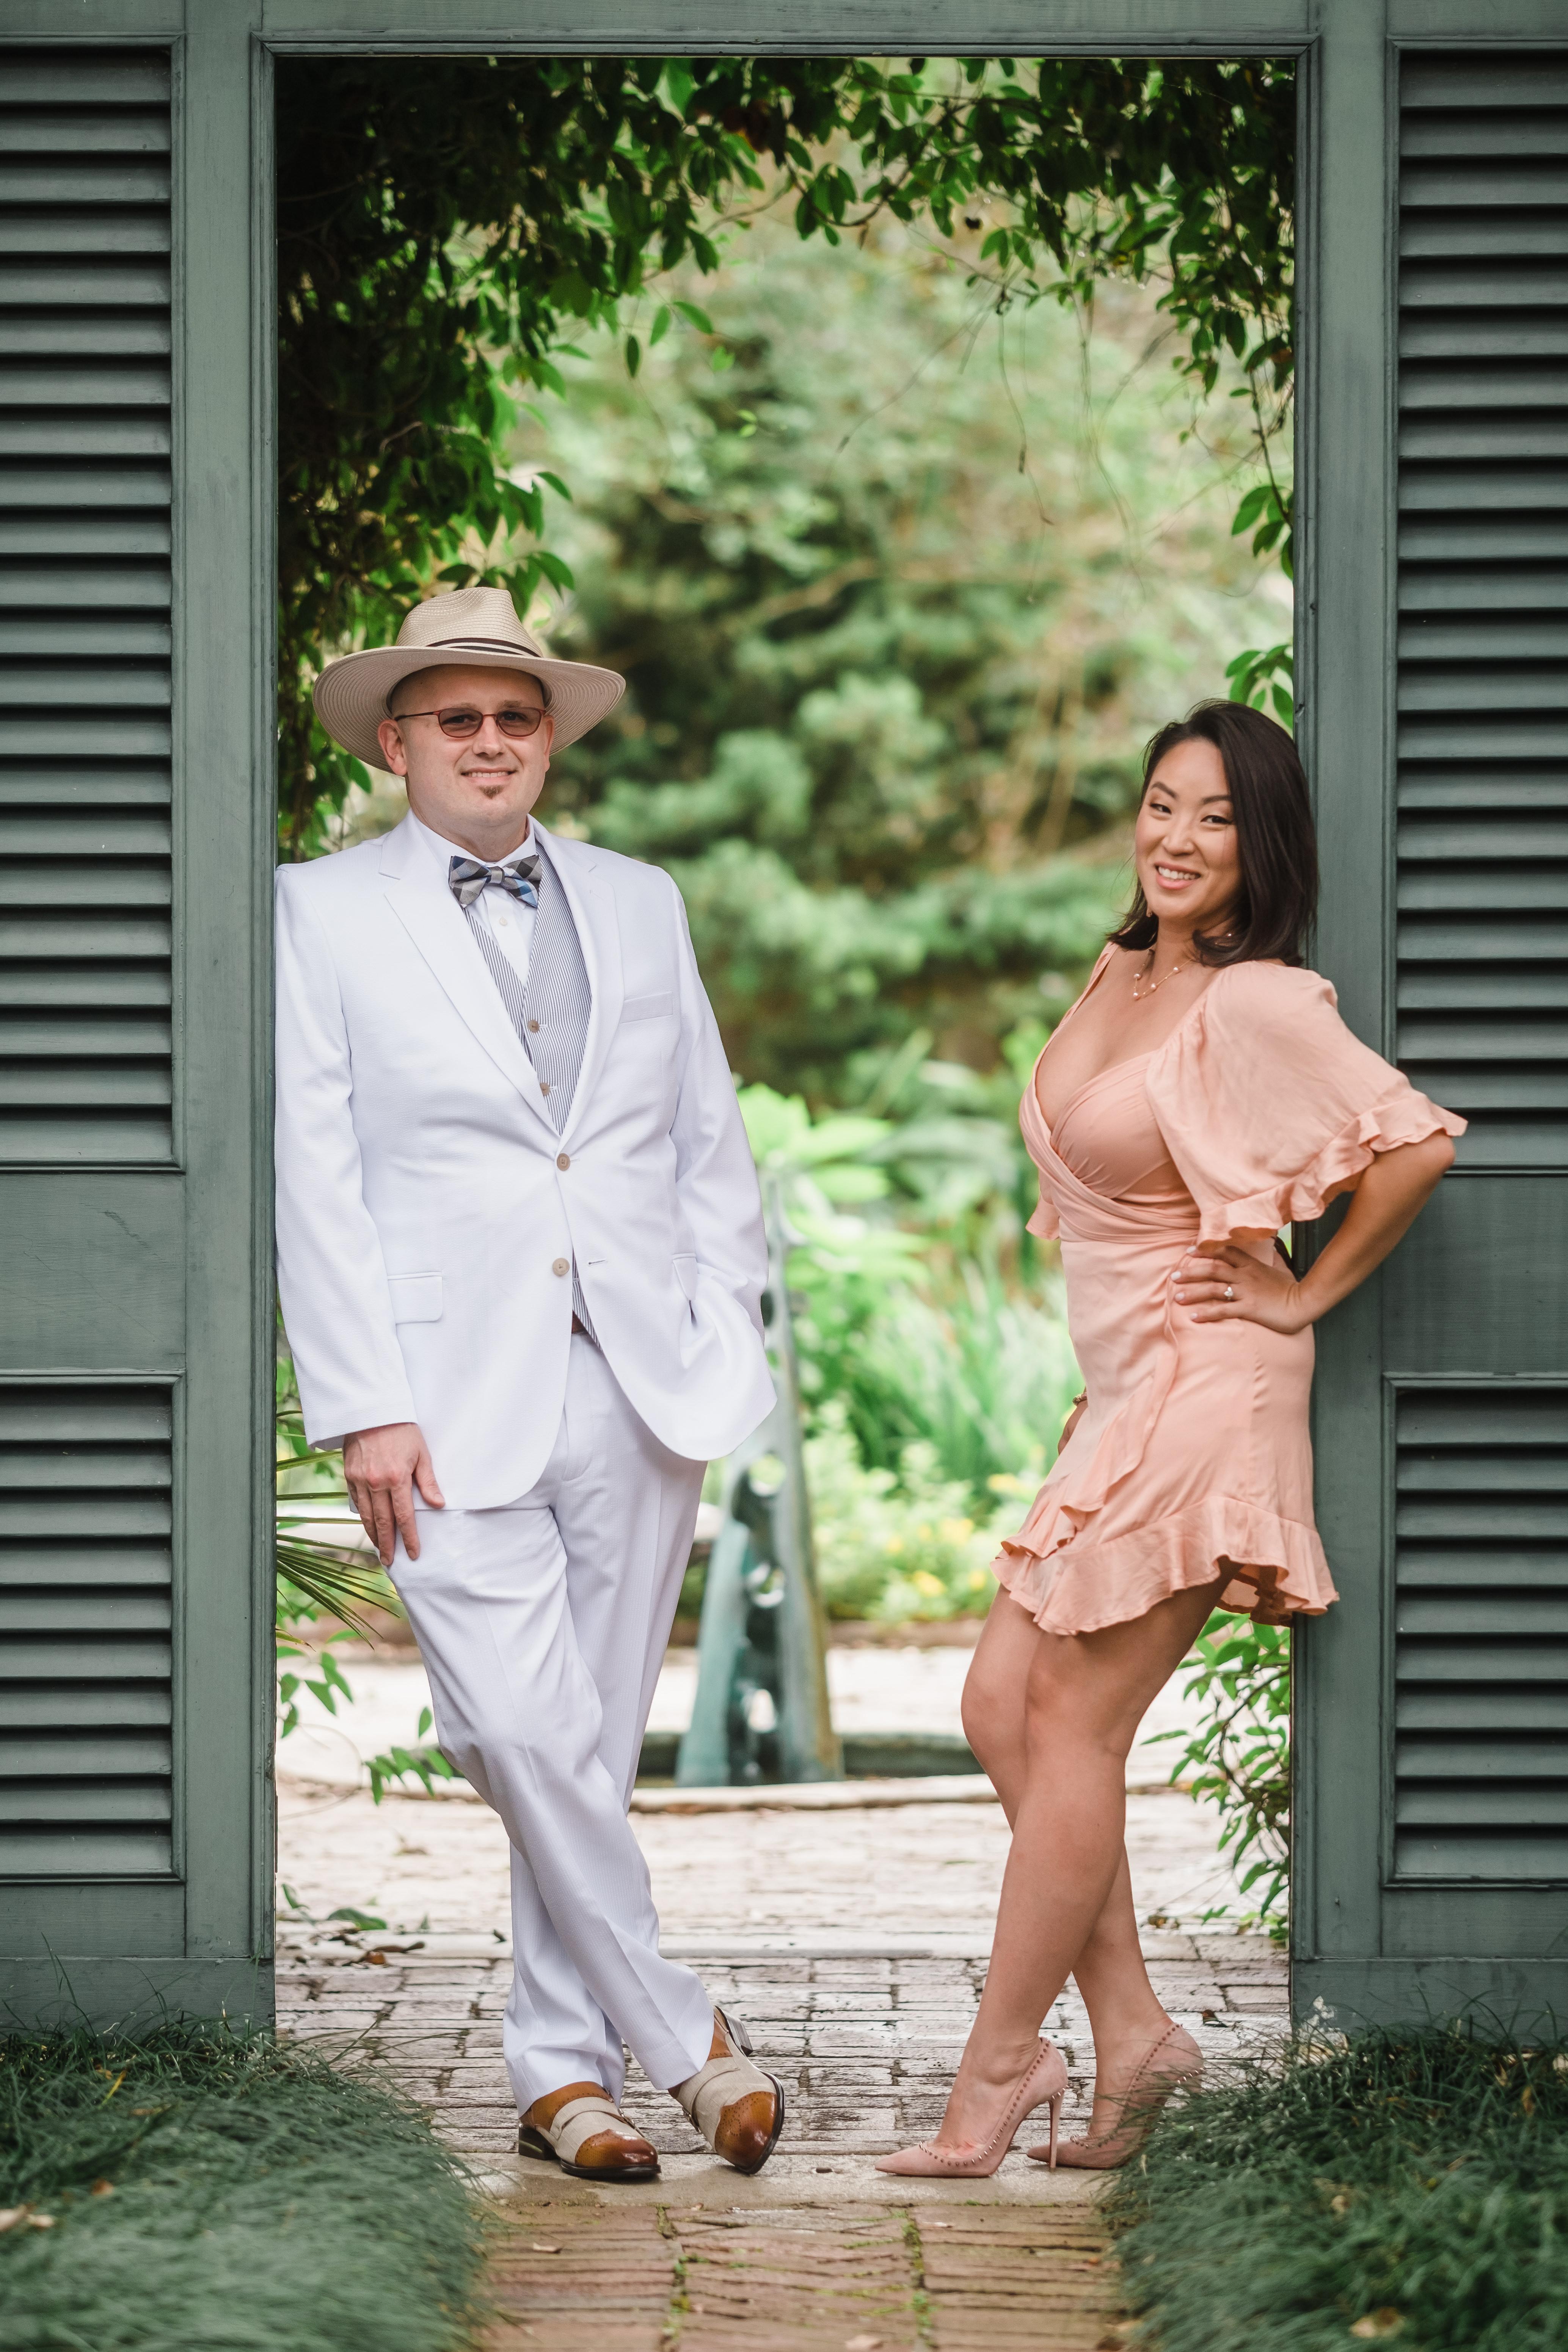 The Wedding Website of Jennifer Chi and Beau Button